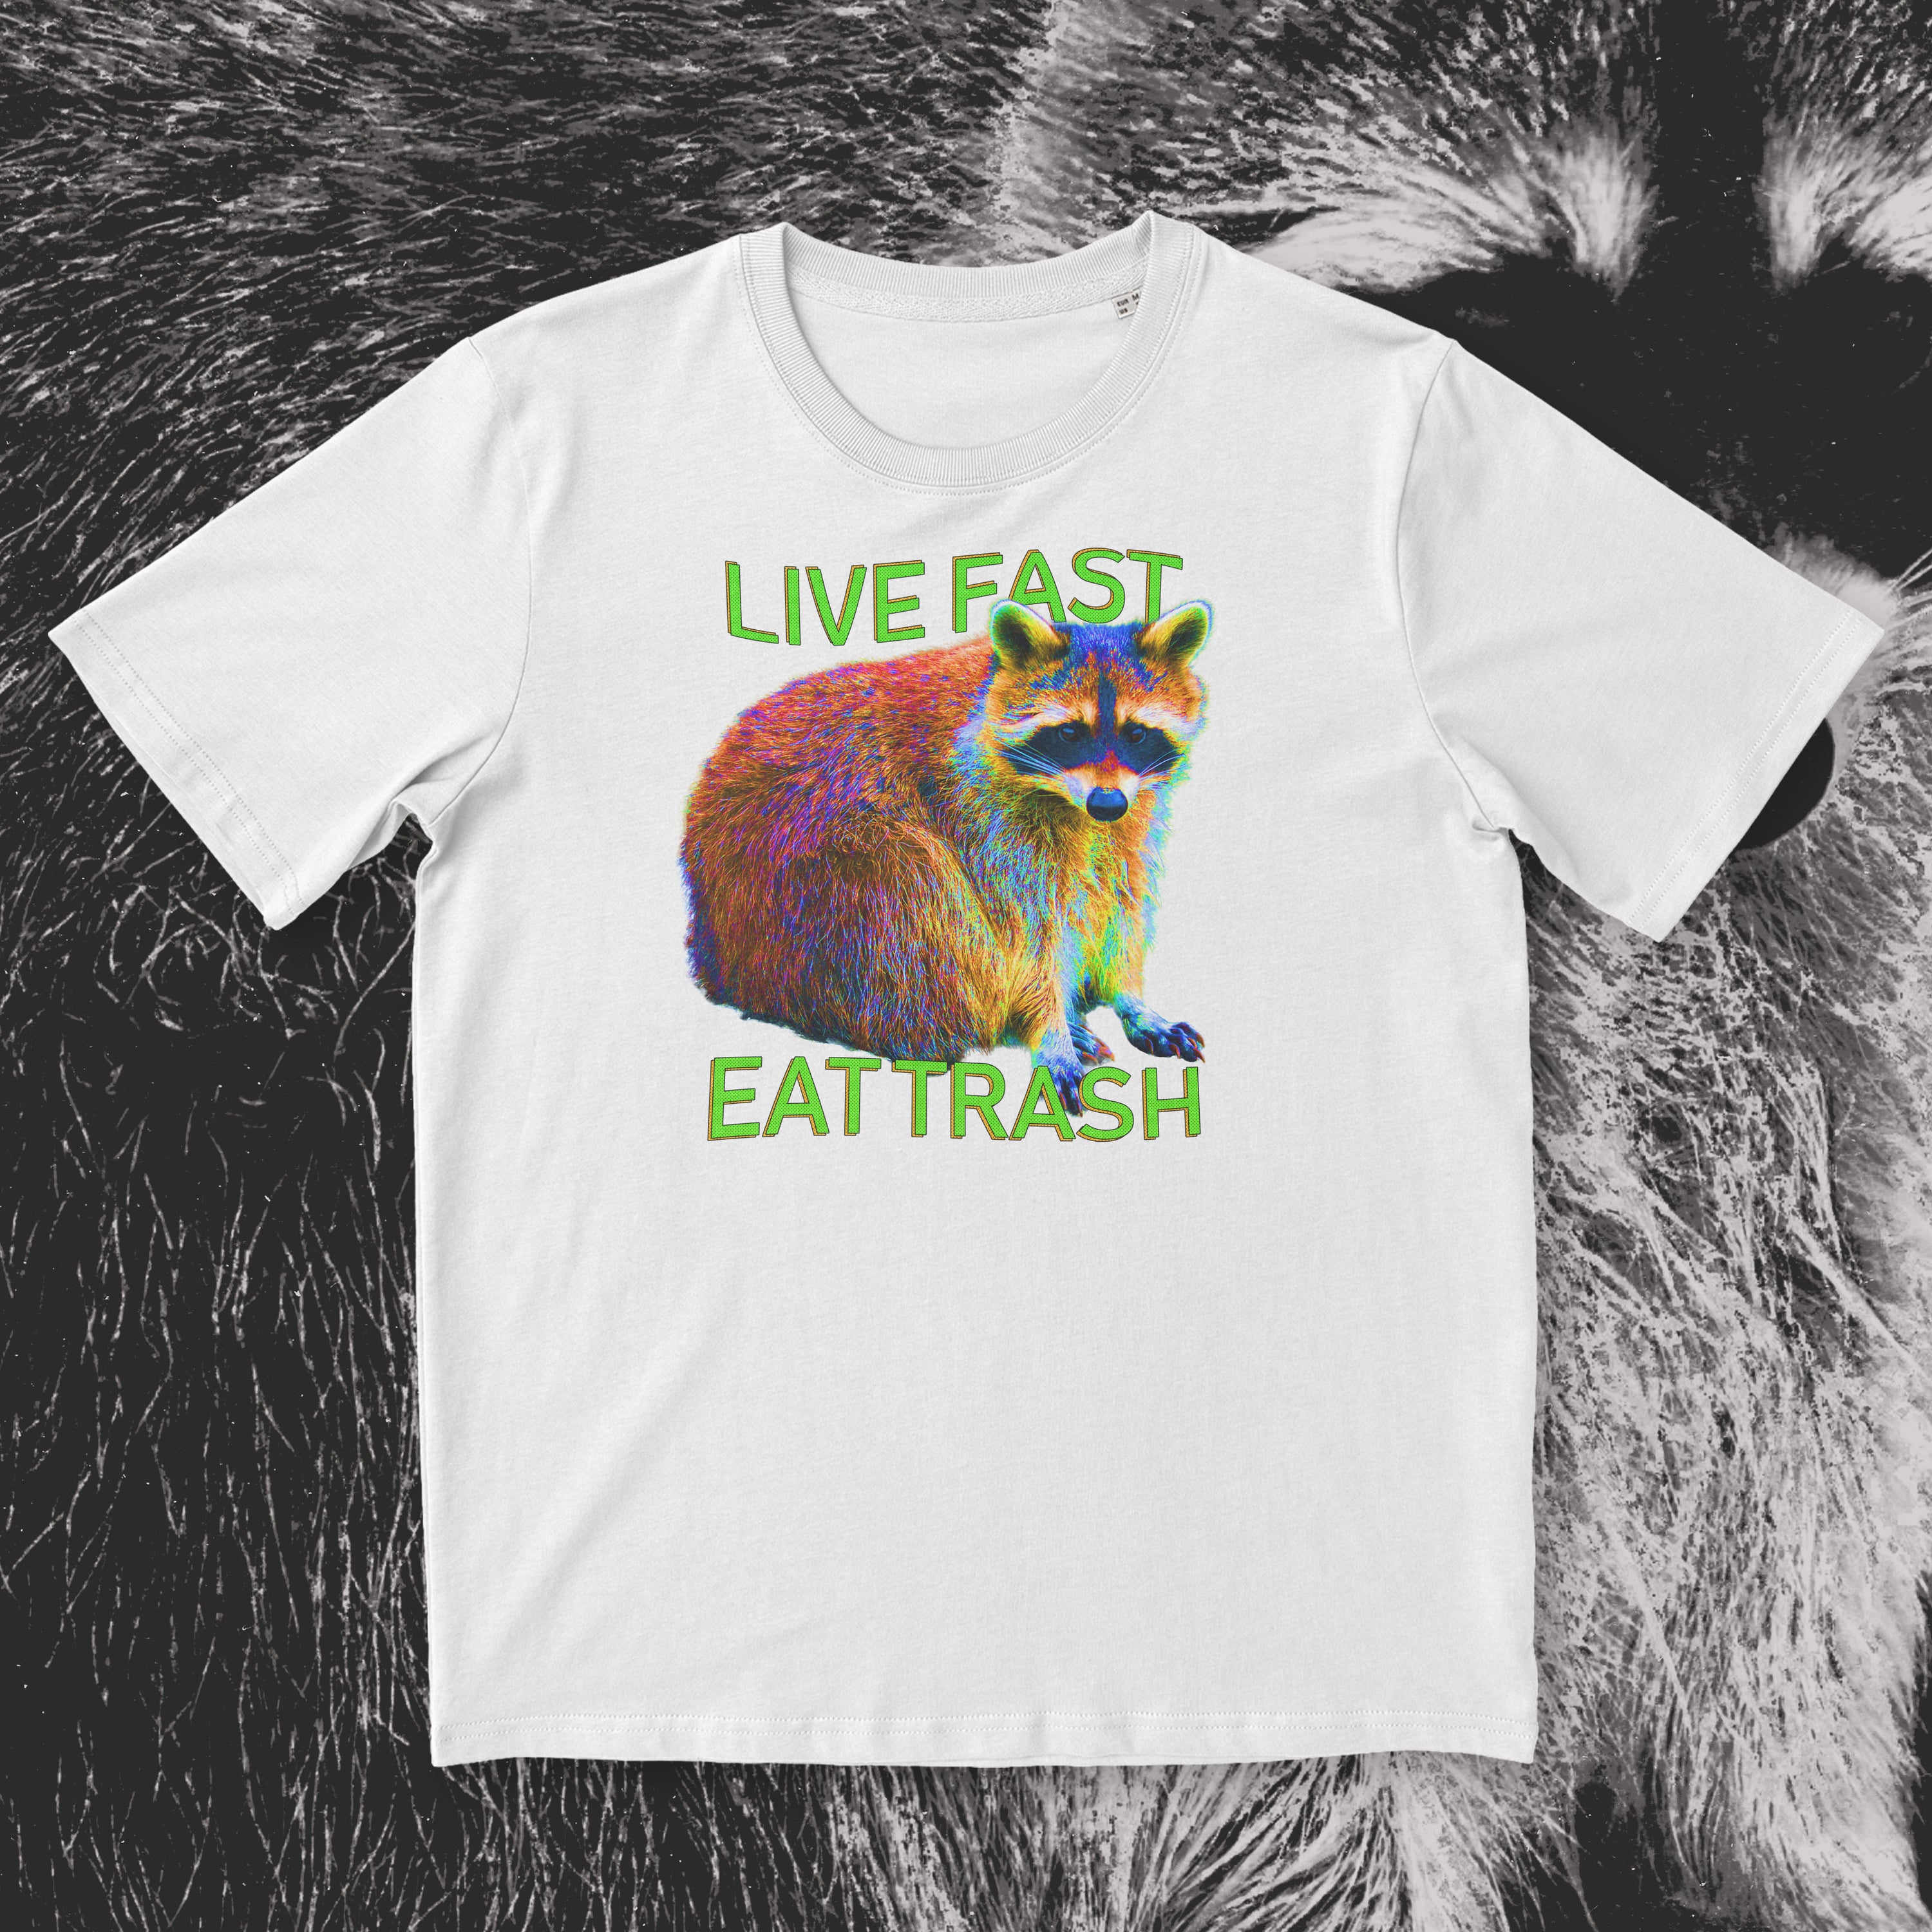  Live Fast! Eat Trash! T-Shirt : Clothing, Shoes & Jewelry